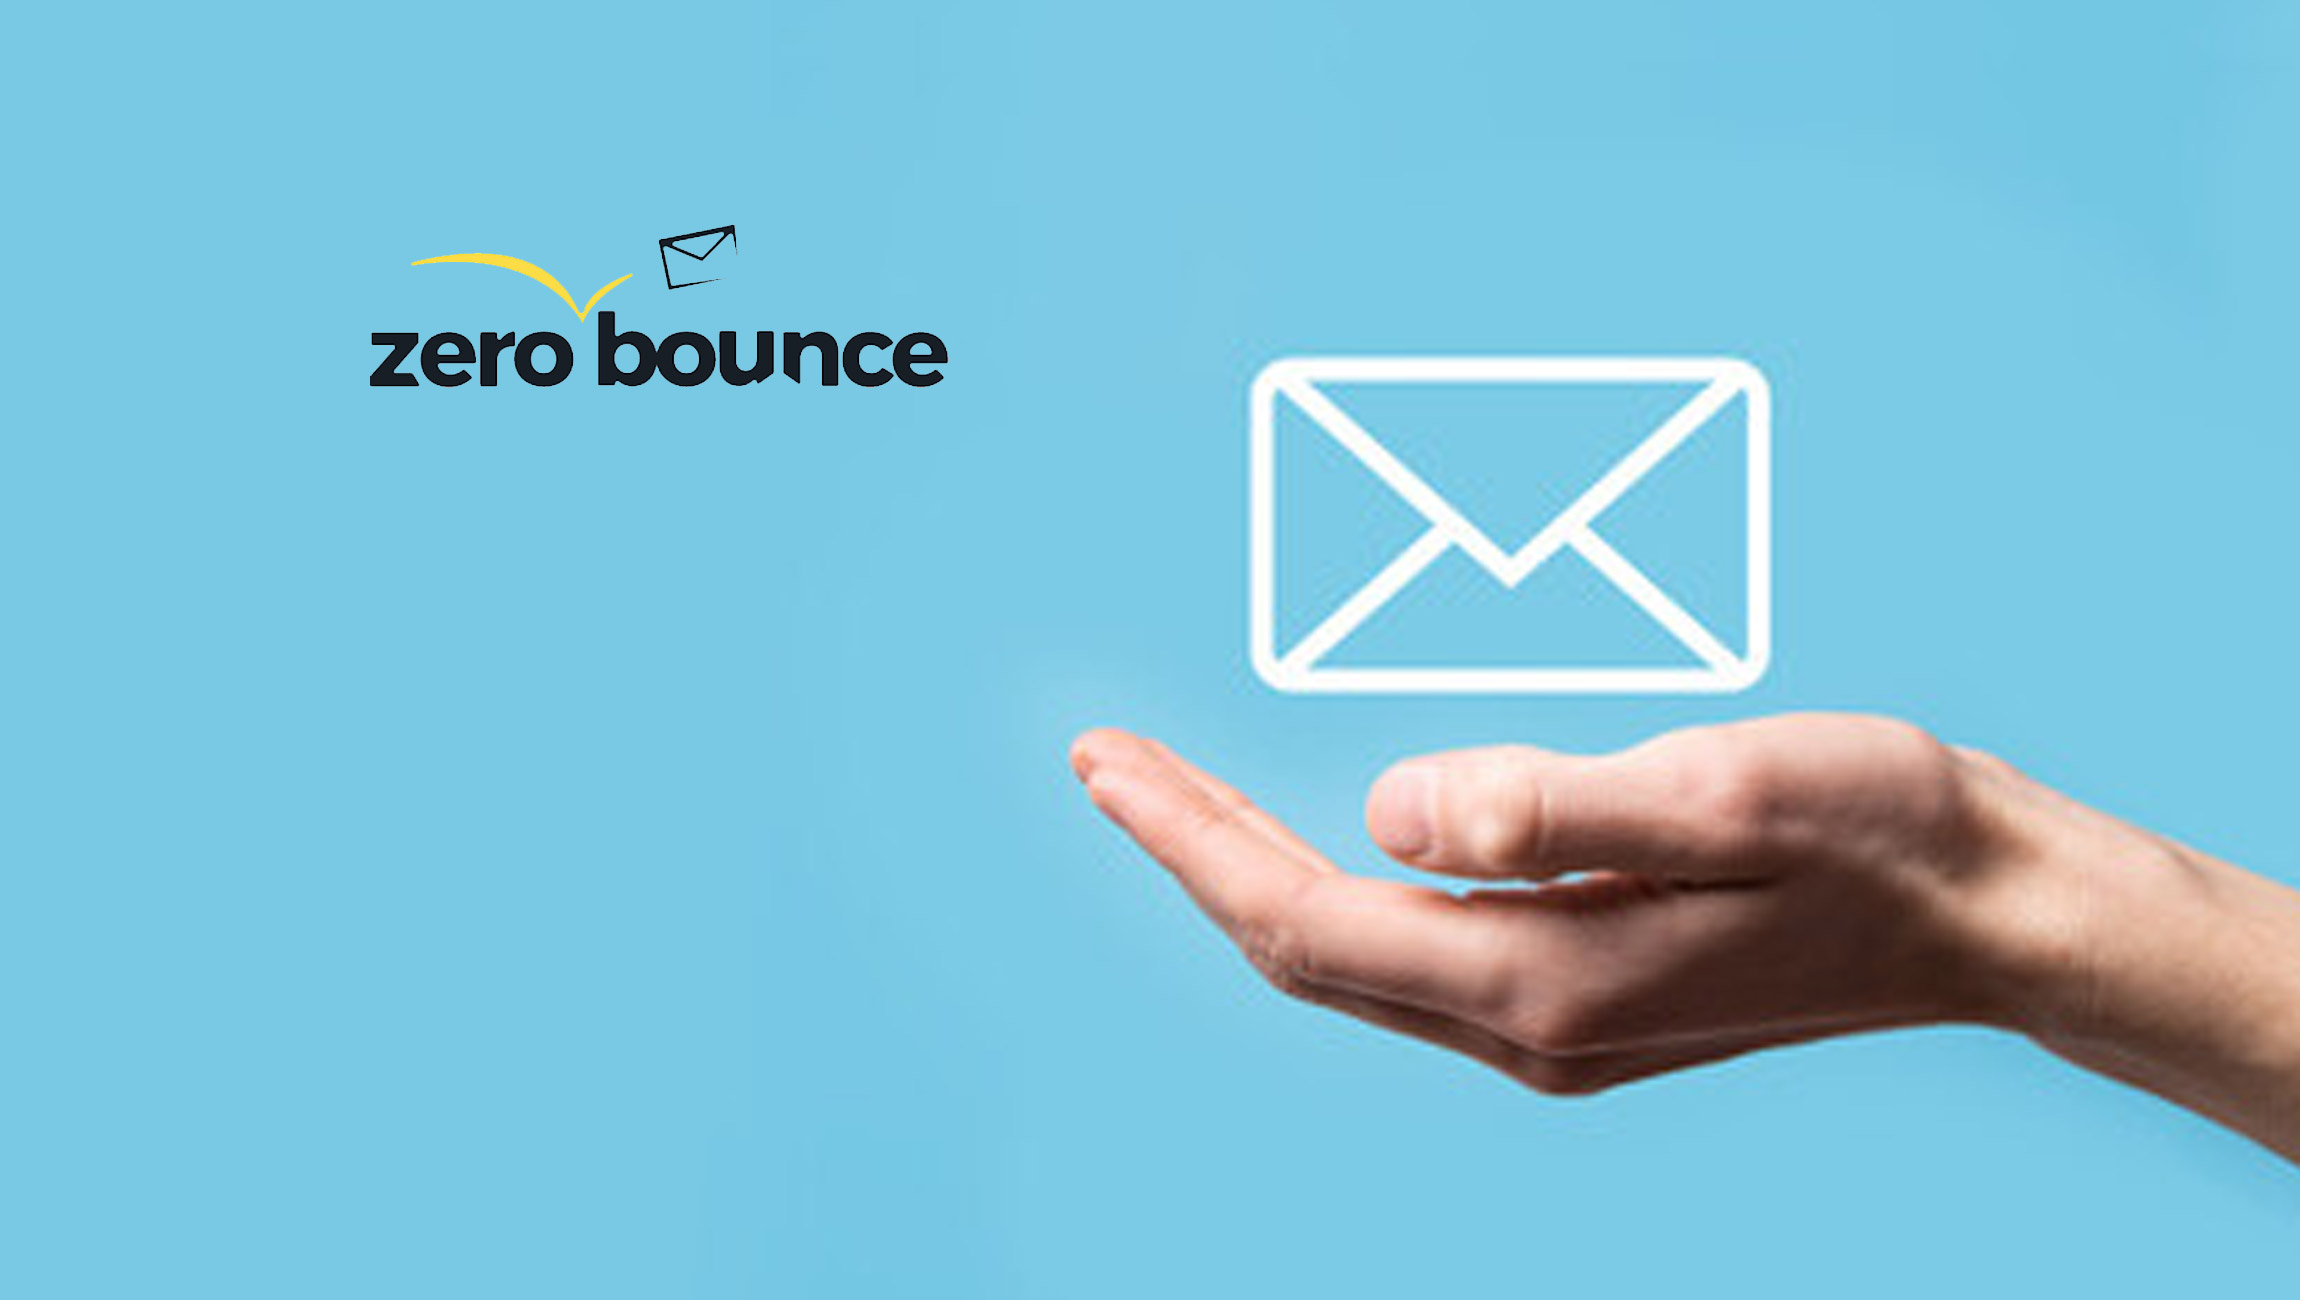 Email Validation Company ZeroBounce Named to Inc. 5000 List for the Fourth Time 1